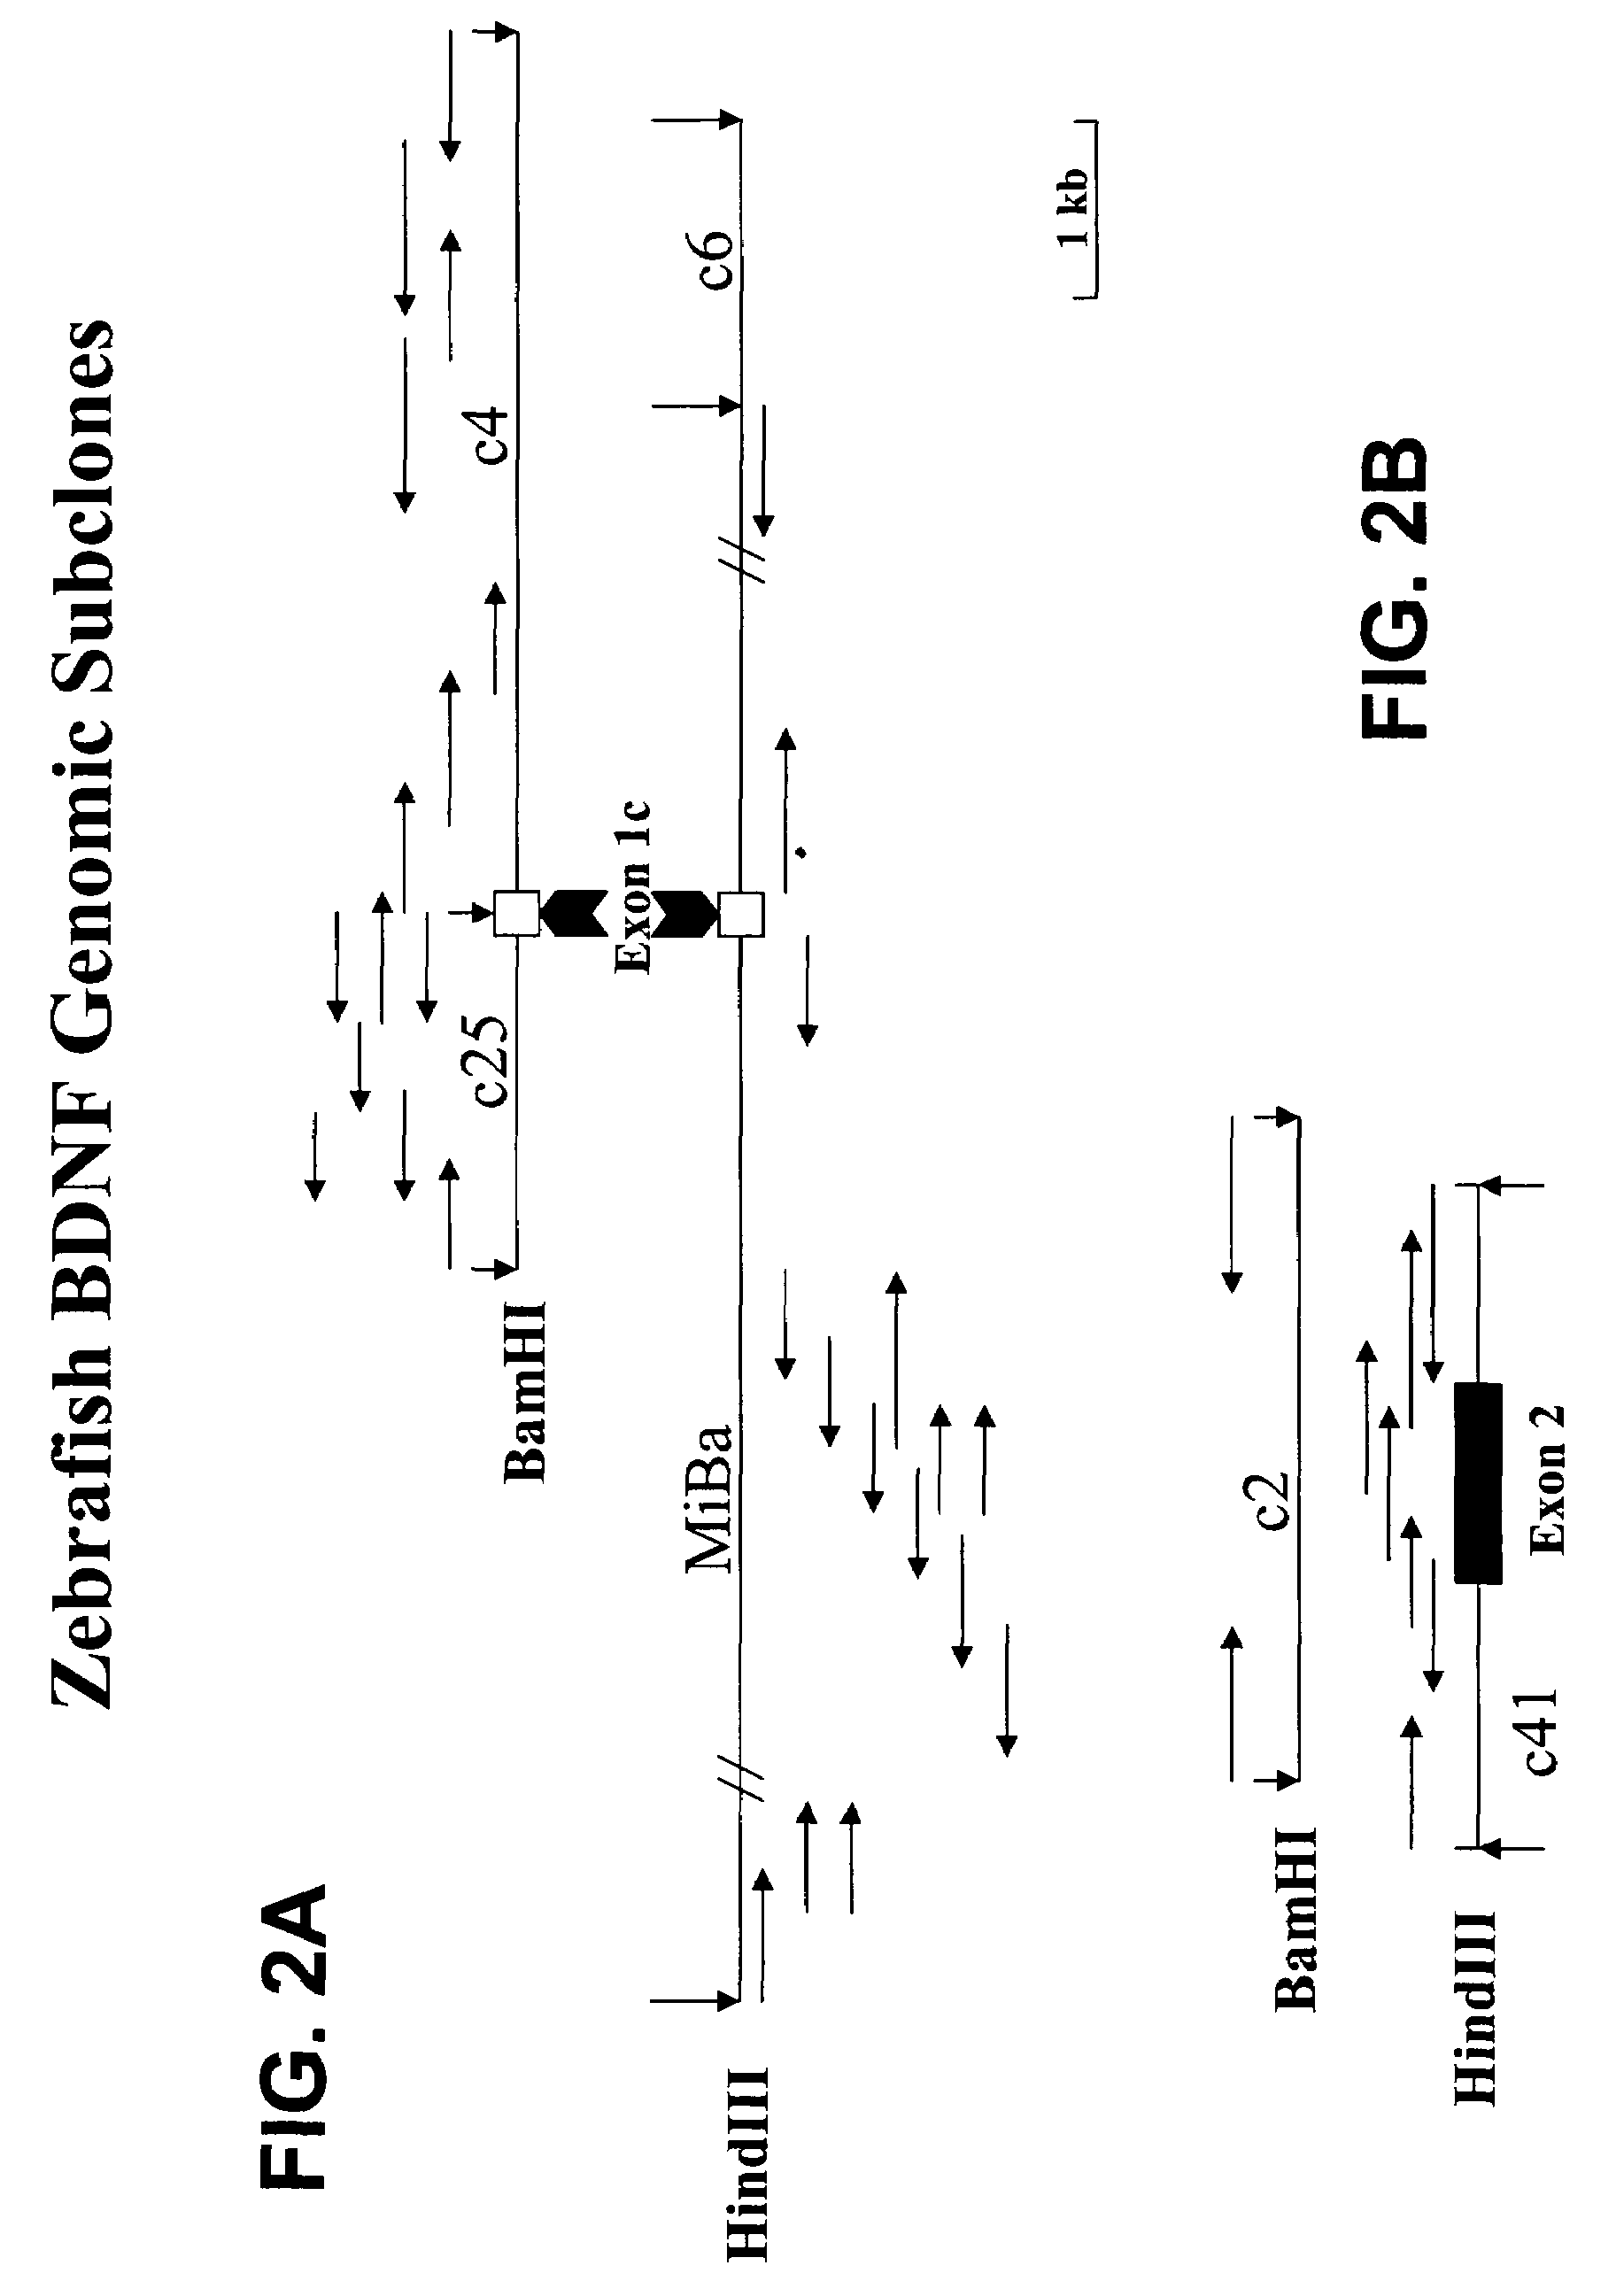 Transgenic screen and method for screening modulators of brain-derived neurotrophic factor (BDNF) production